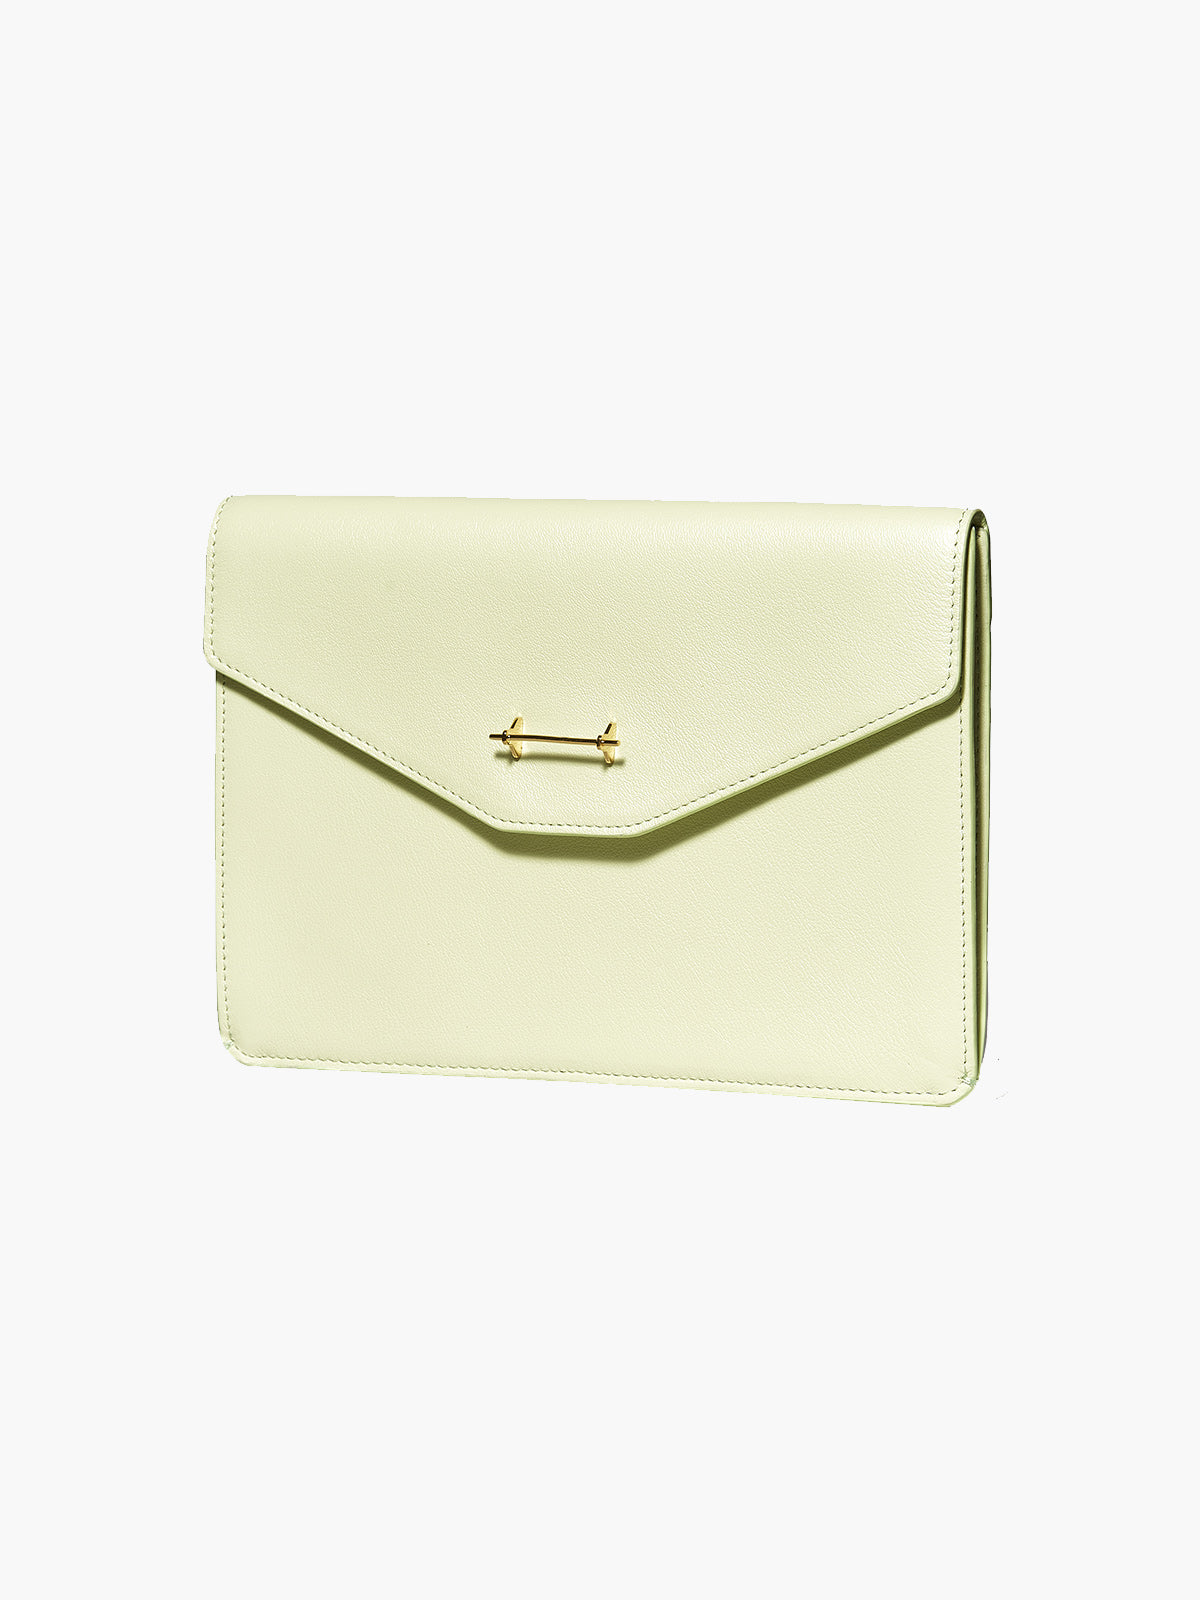 Women's Stylish Patent Leather Envelope Clutch